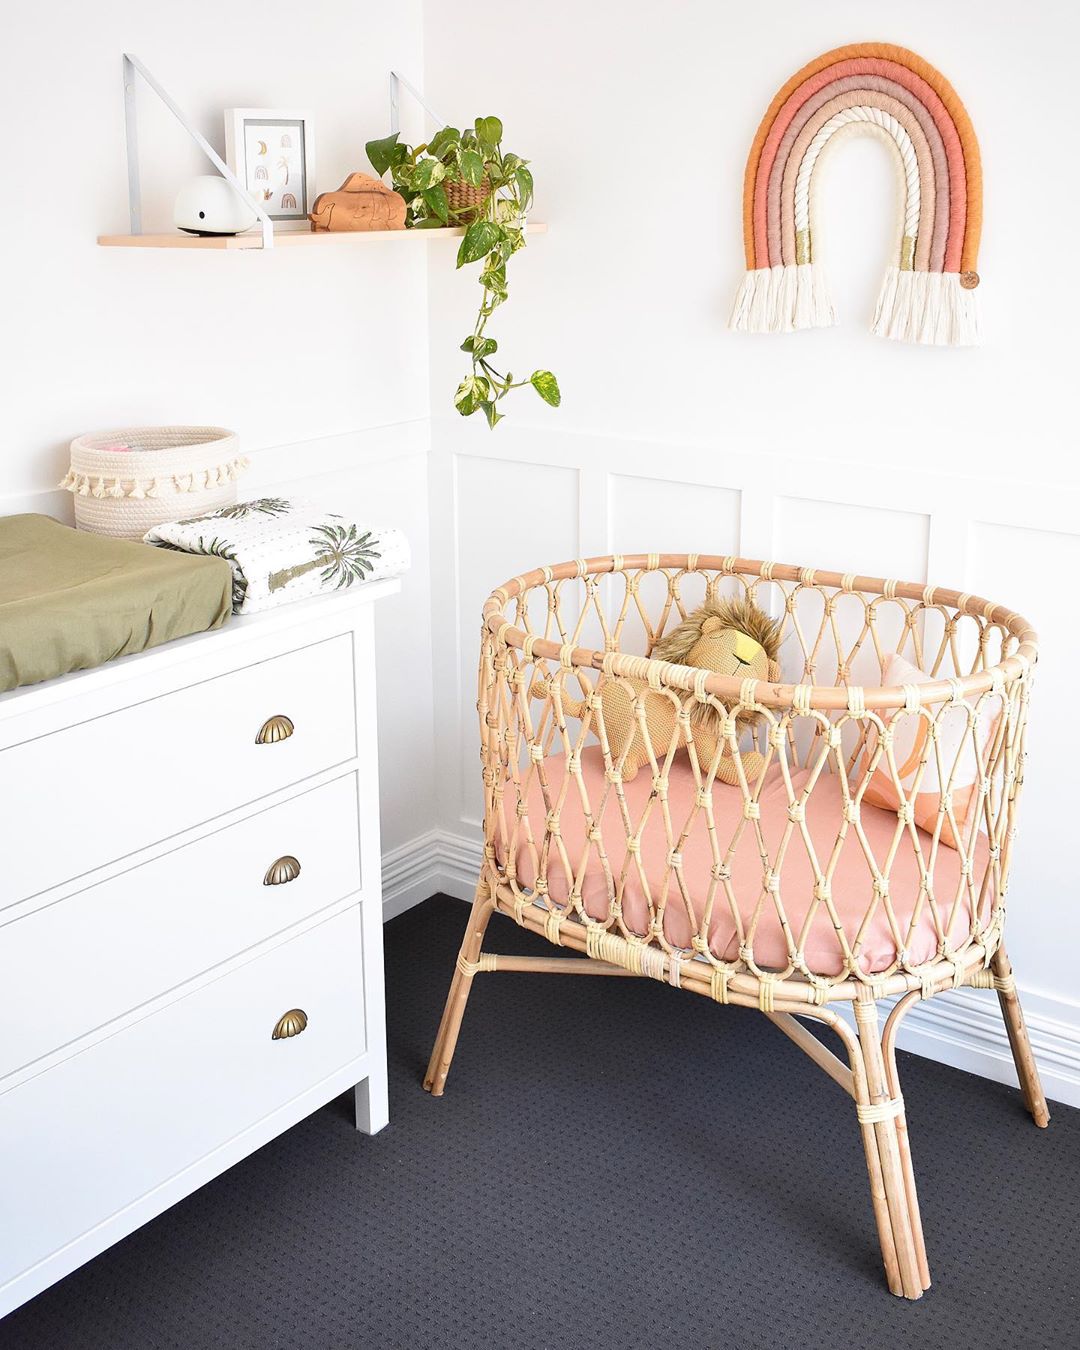 Bassinet and changing table in corner. Photo by Instagram user @mykindofbliss